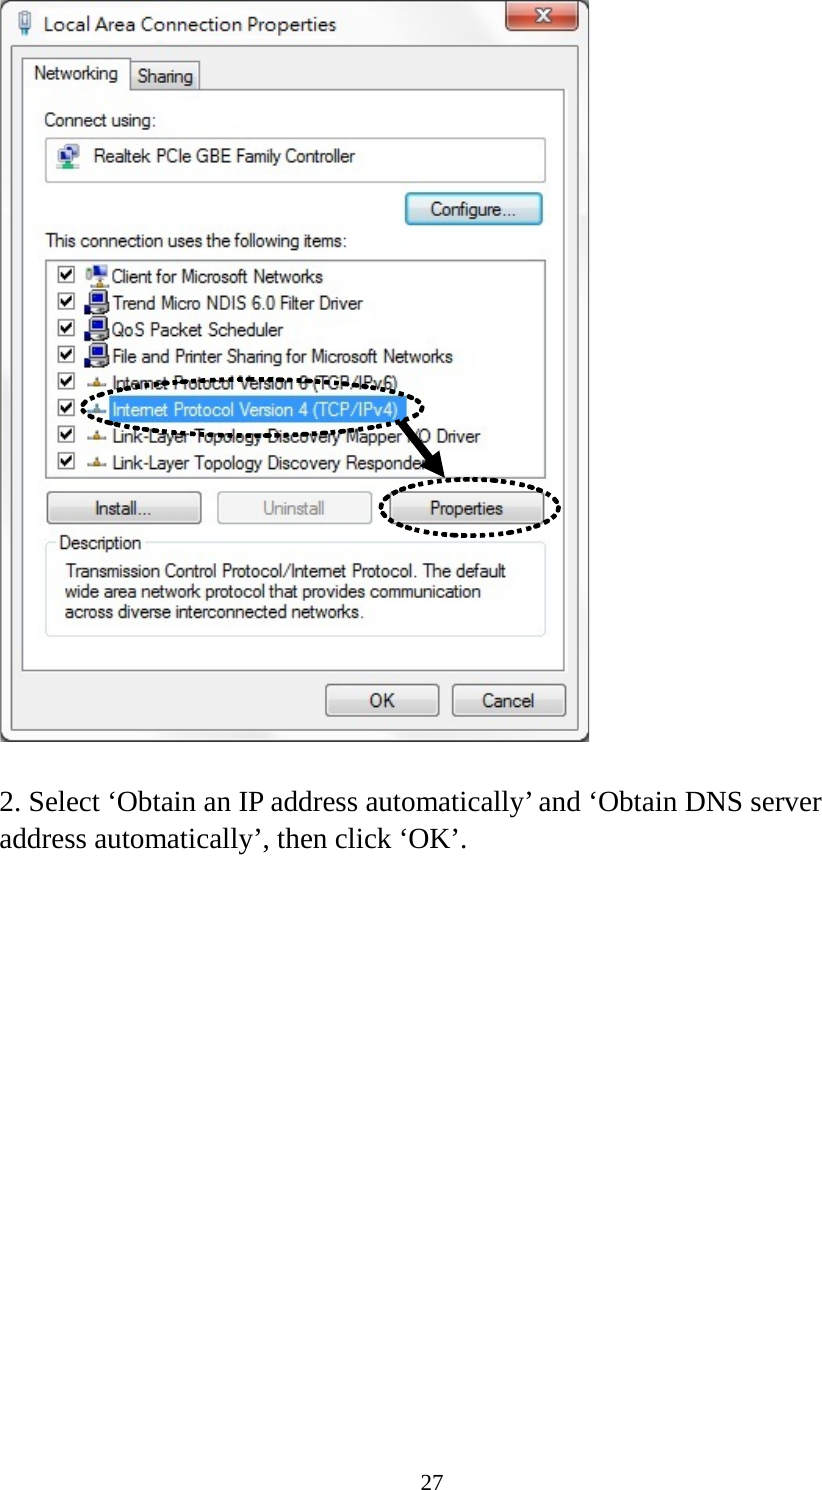 27   2. Select ‘Obtain an IP address automatically’ and ‘Obtain DNS server address automatically’, then click ‘OK’.       